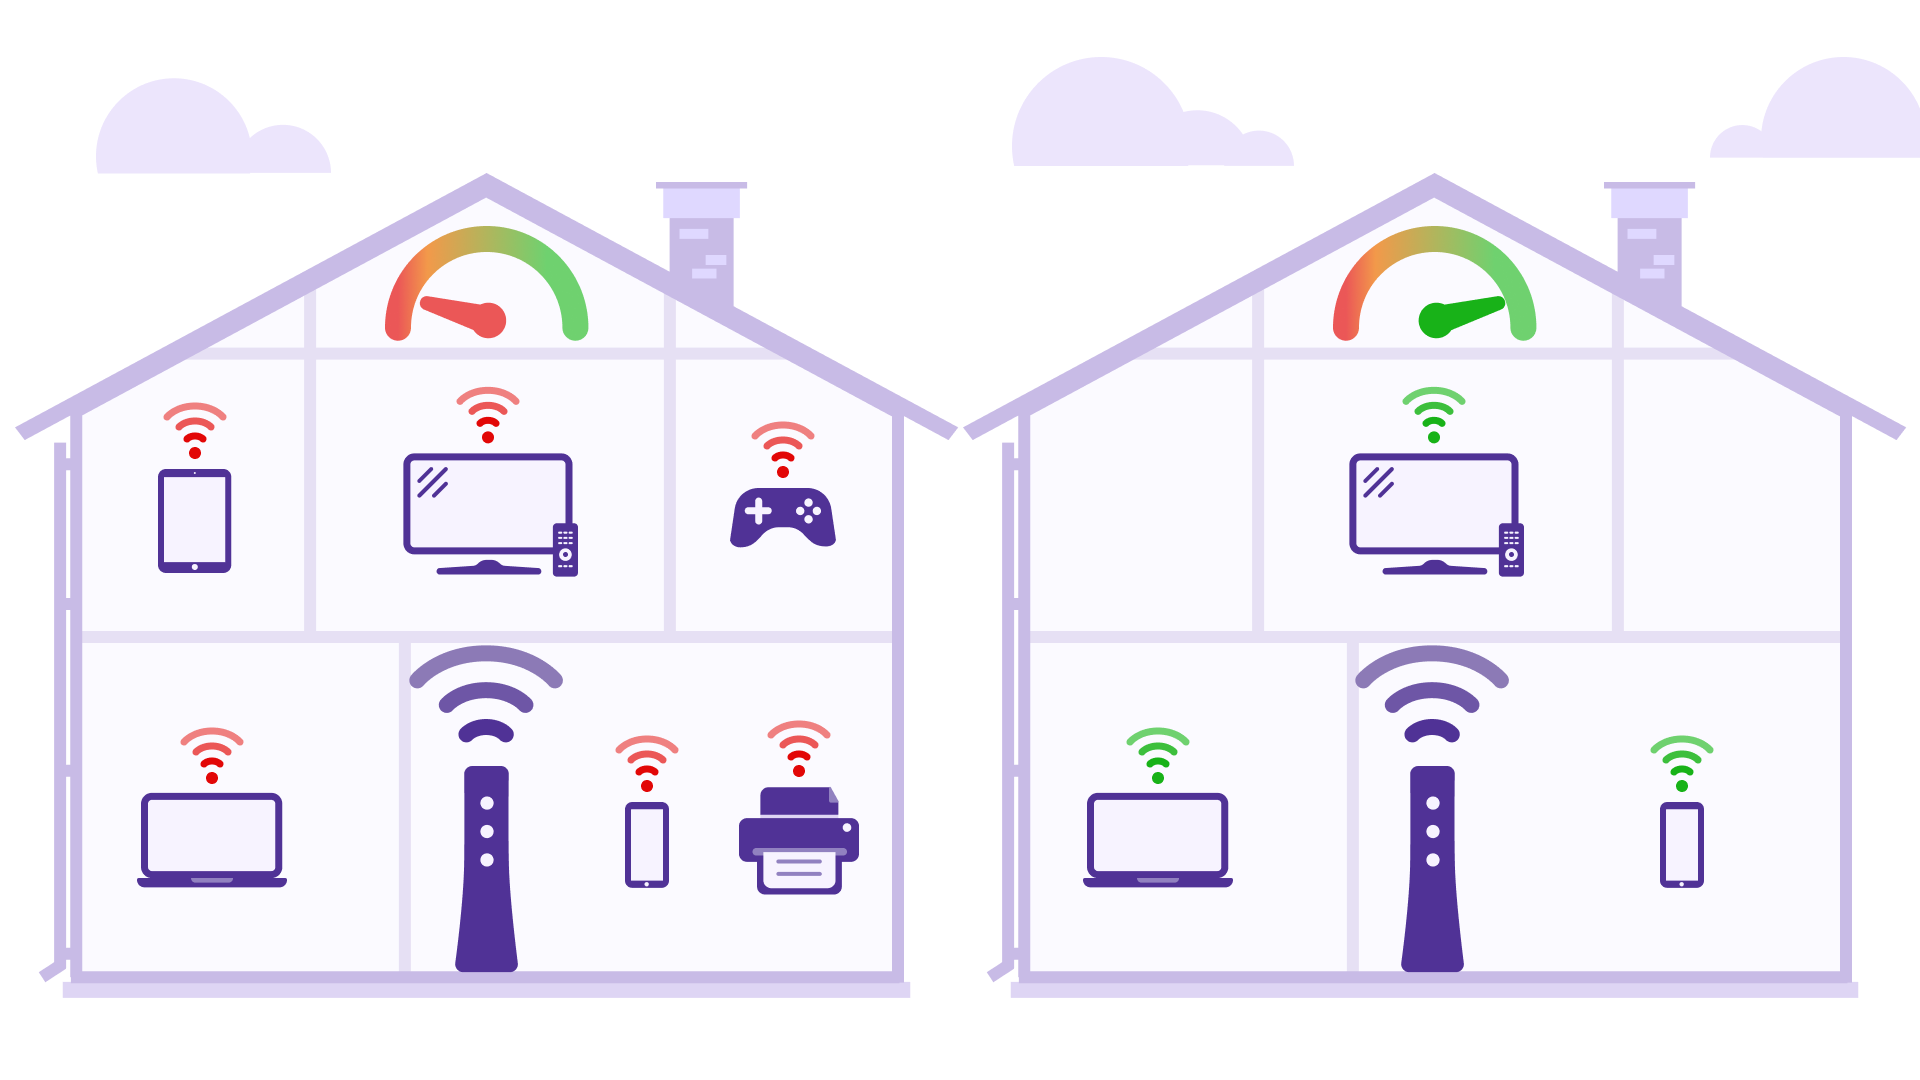 Illustration of number of devices on WiFi network